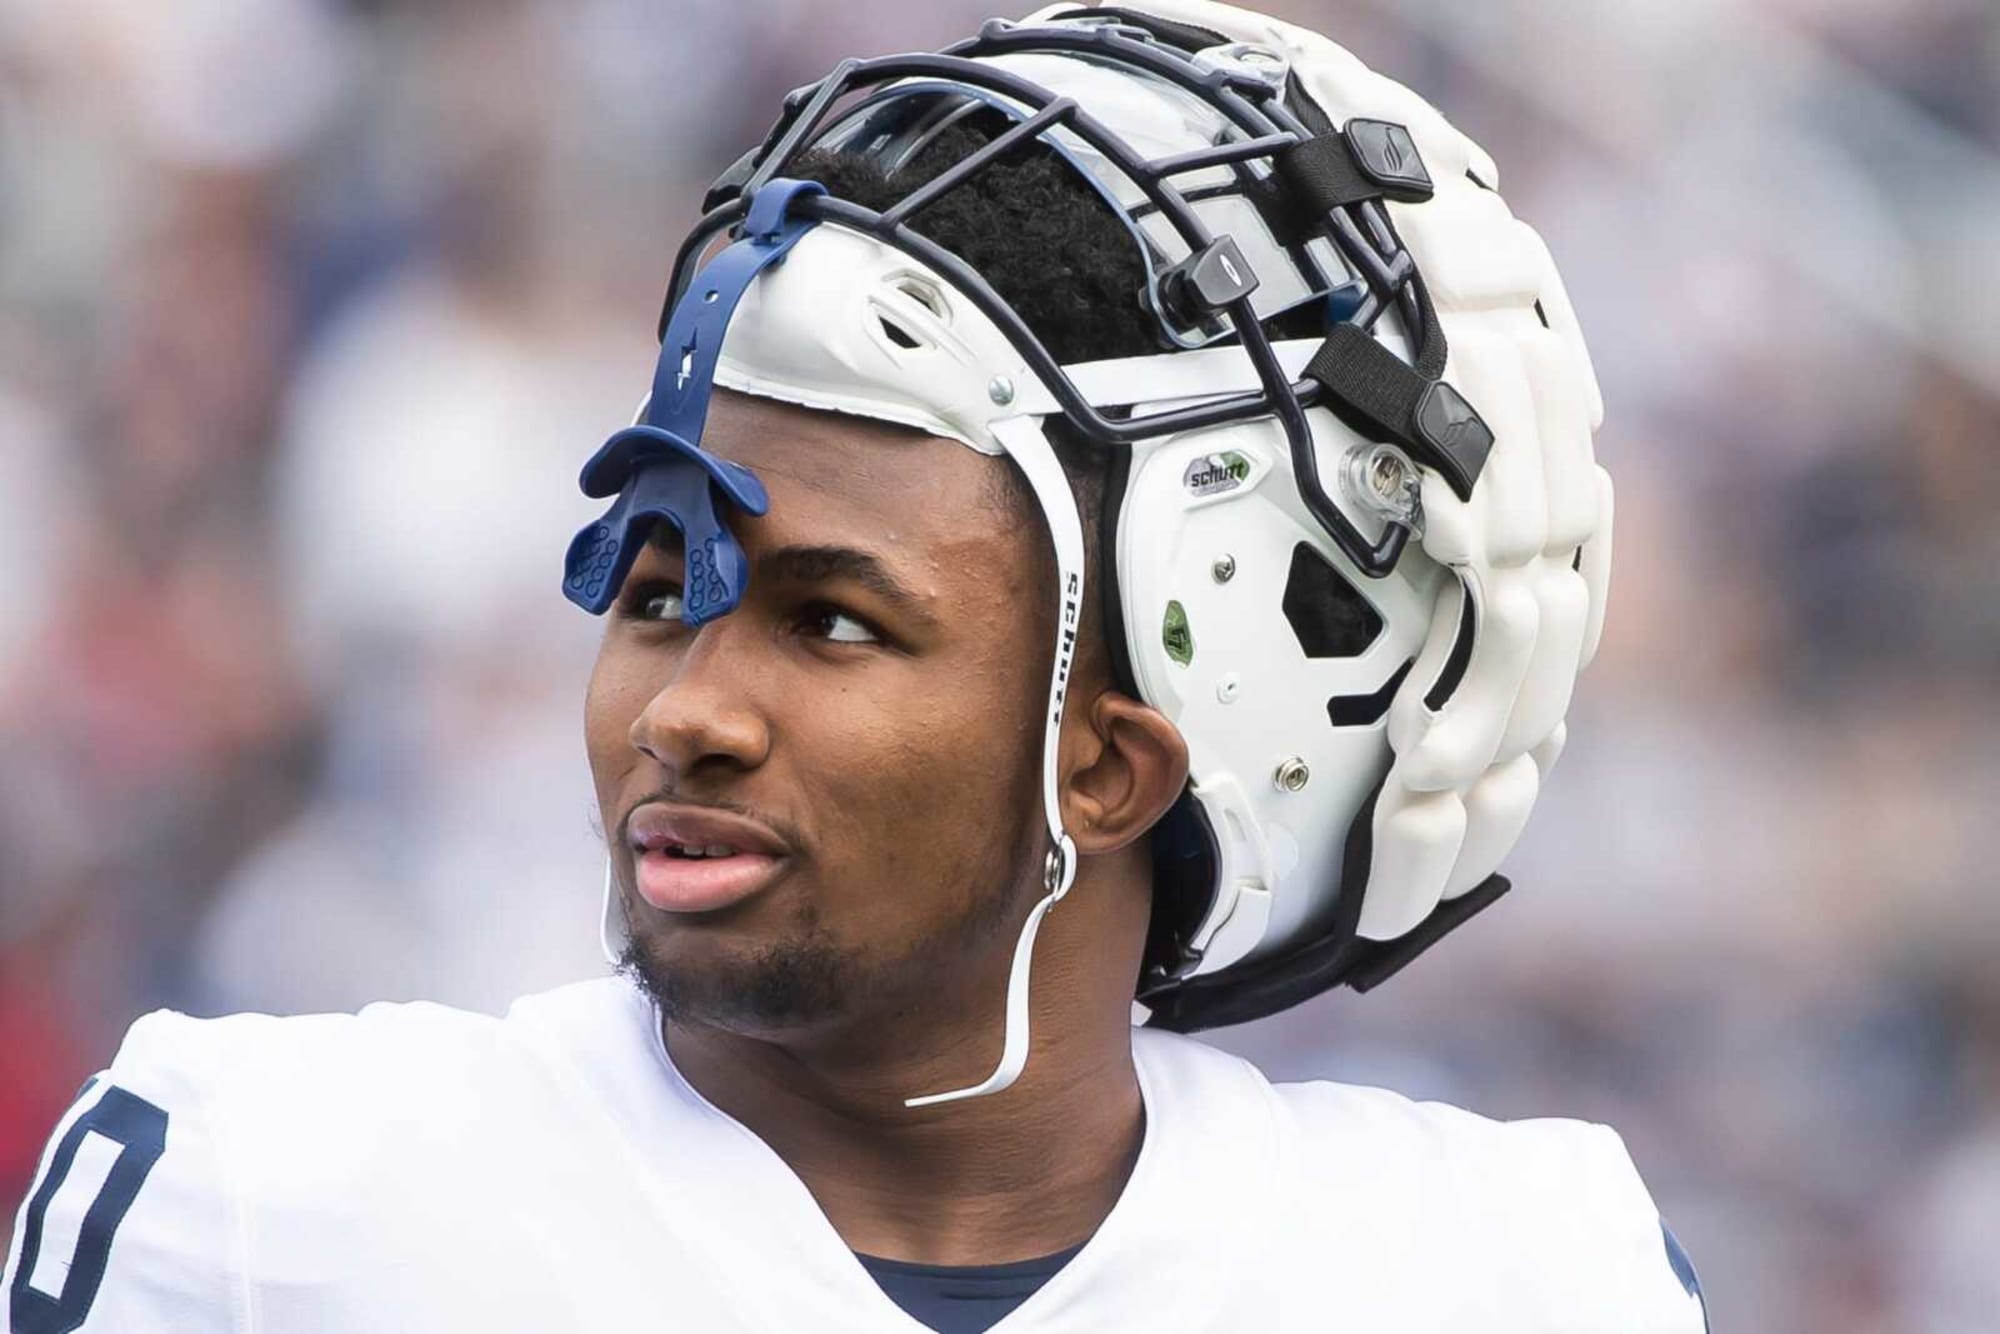 Penn State Football Three reasons why Nick Singleton will breakout in 2022